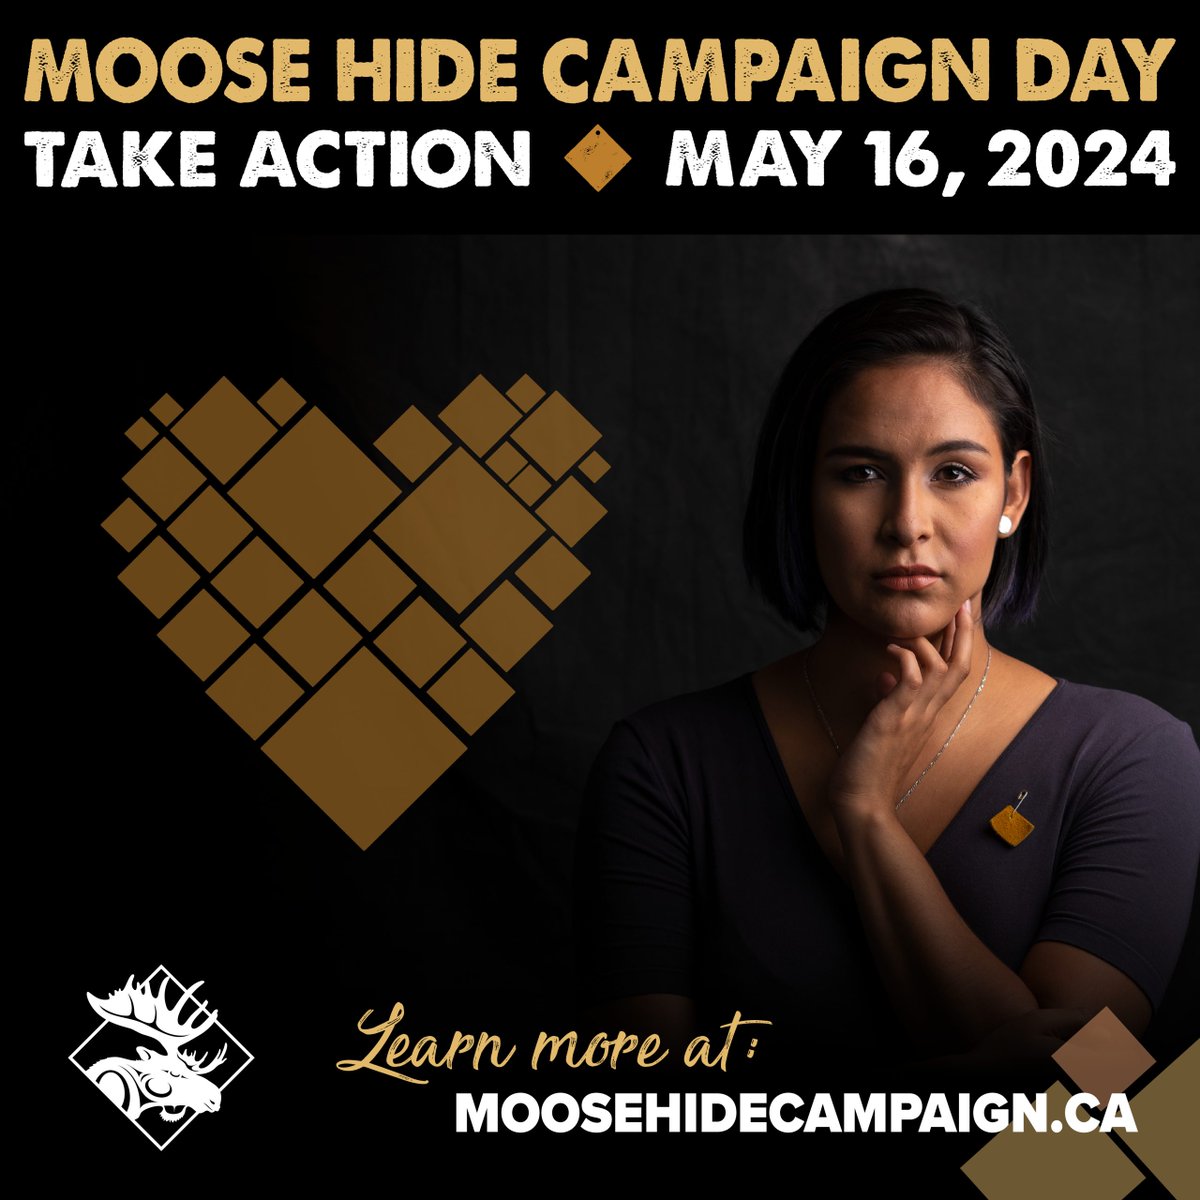 I wear a moose hide pin today. We’re in the midst of an unprecedented mental health crisis. We must come together to heal and prevent violence. #MooseHideCampaignDay moosehidecampaign.ca/campaignda